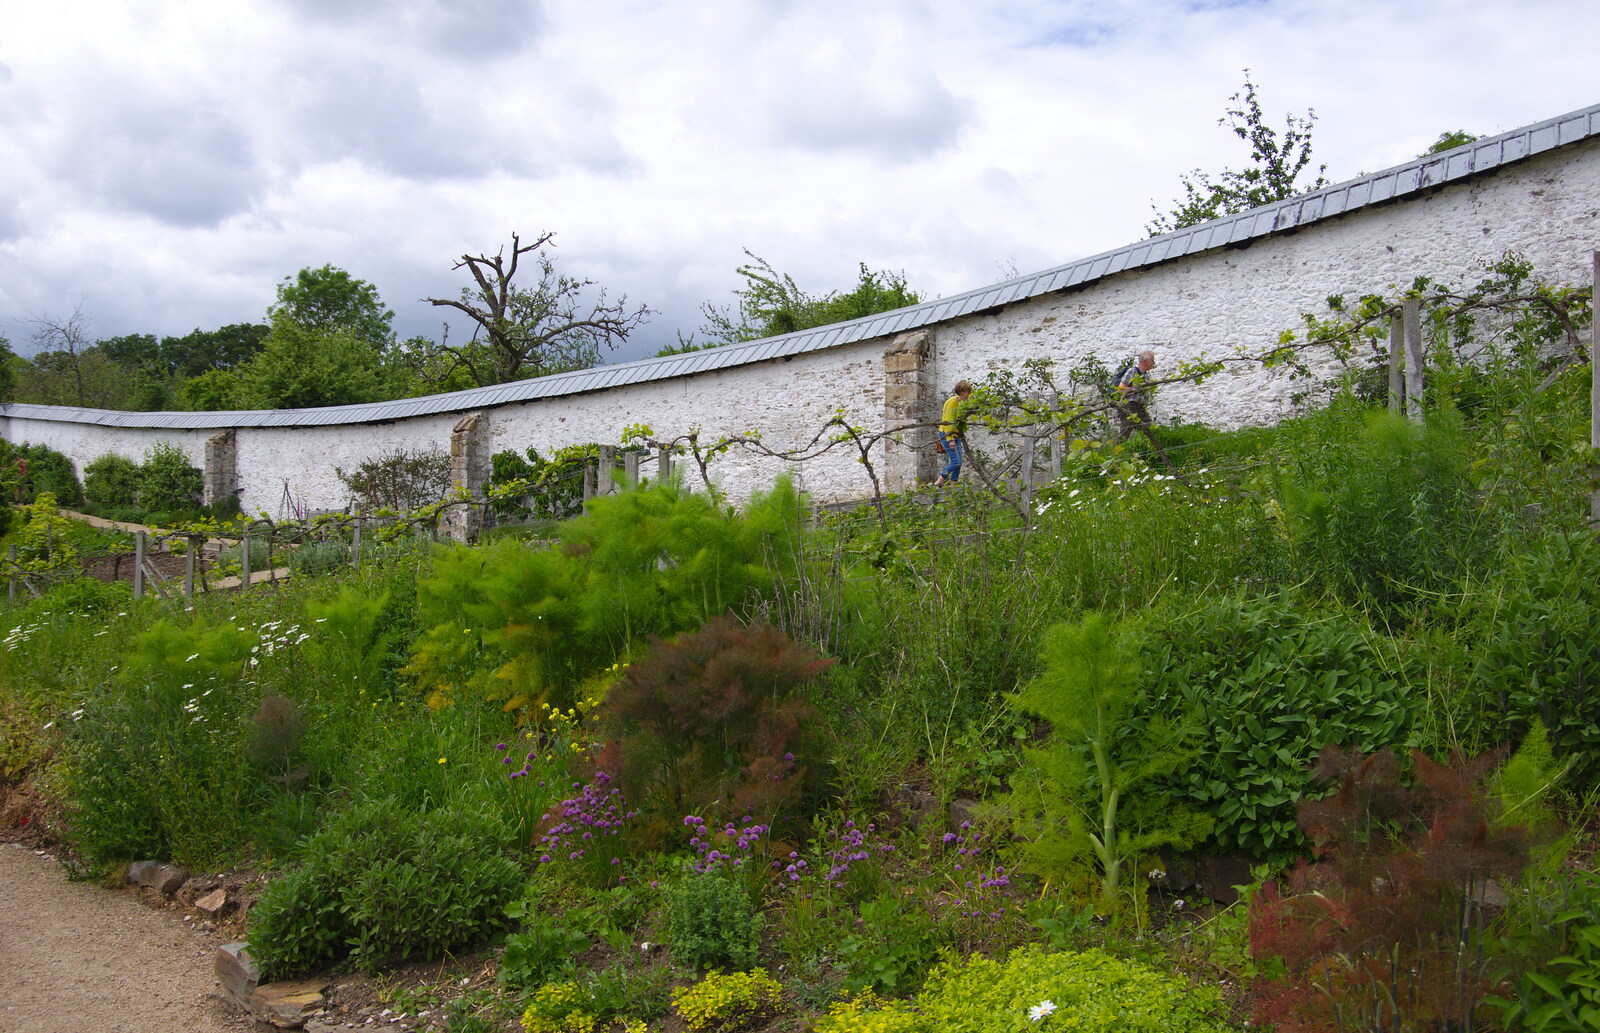 The unusually-shaped walled garden from Chagford Lido and a Trip to Parke, Bovey Tracey, Devon - 25th May 2019